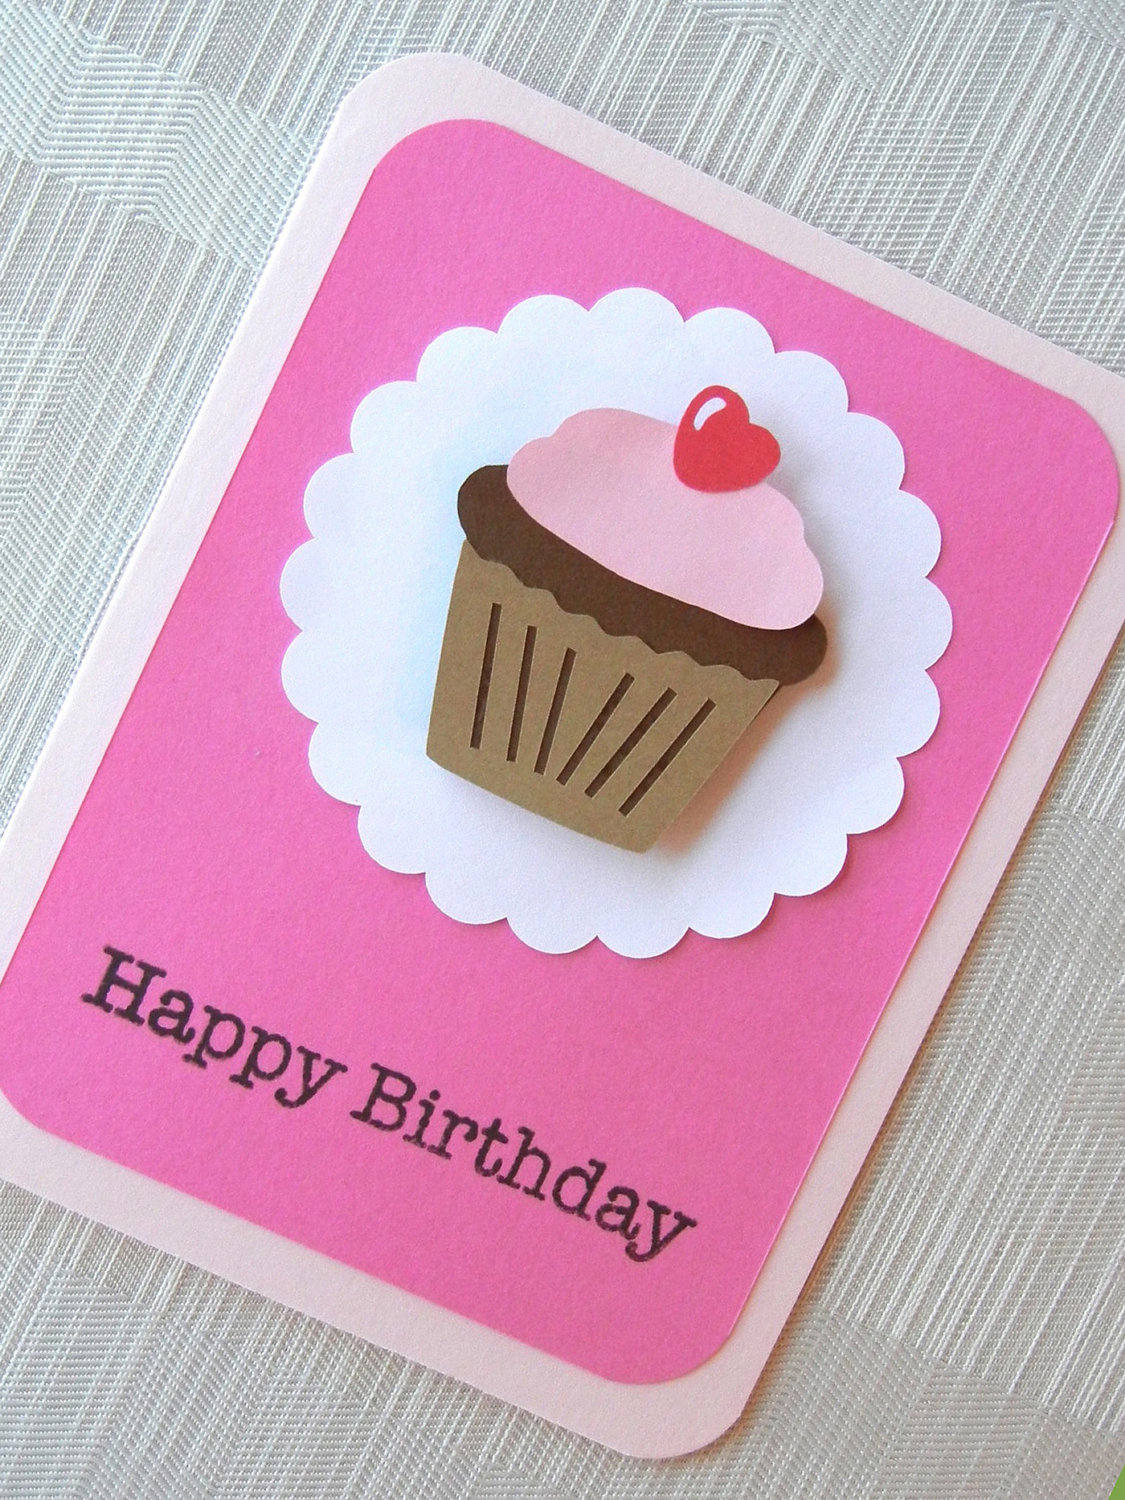 Ideas For Making Birthday Cards For Friends Easy Diy Birthday Cards Ideas And Designs